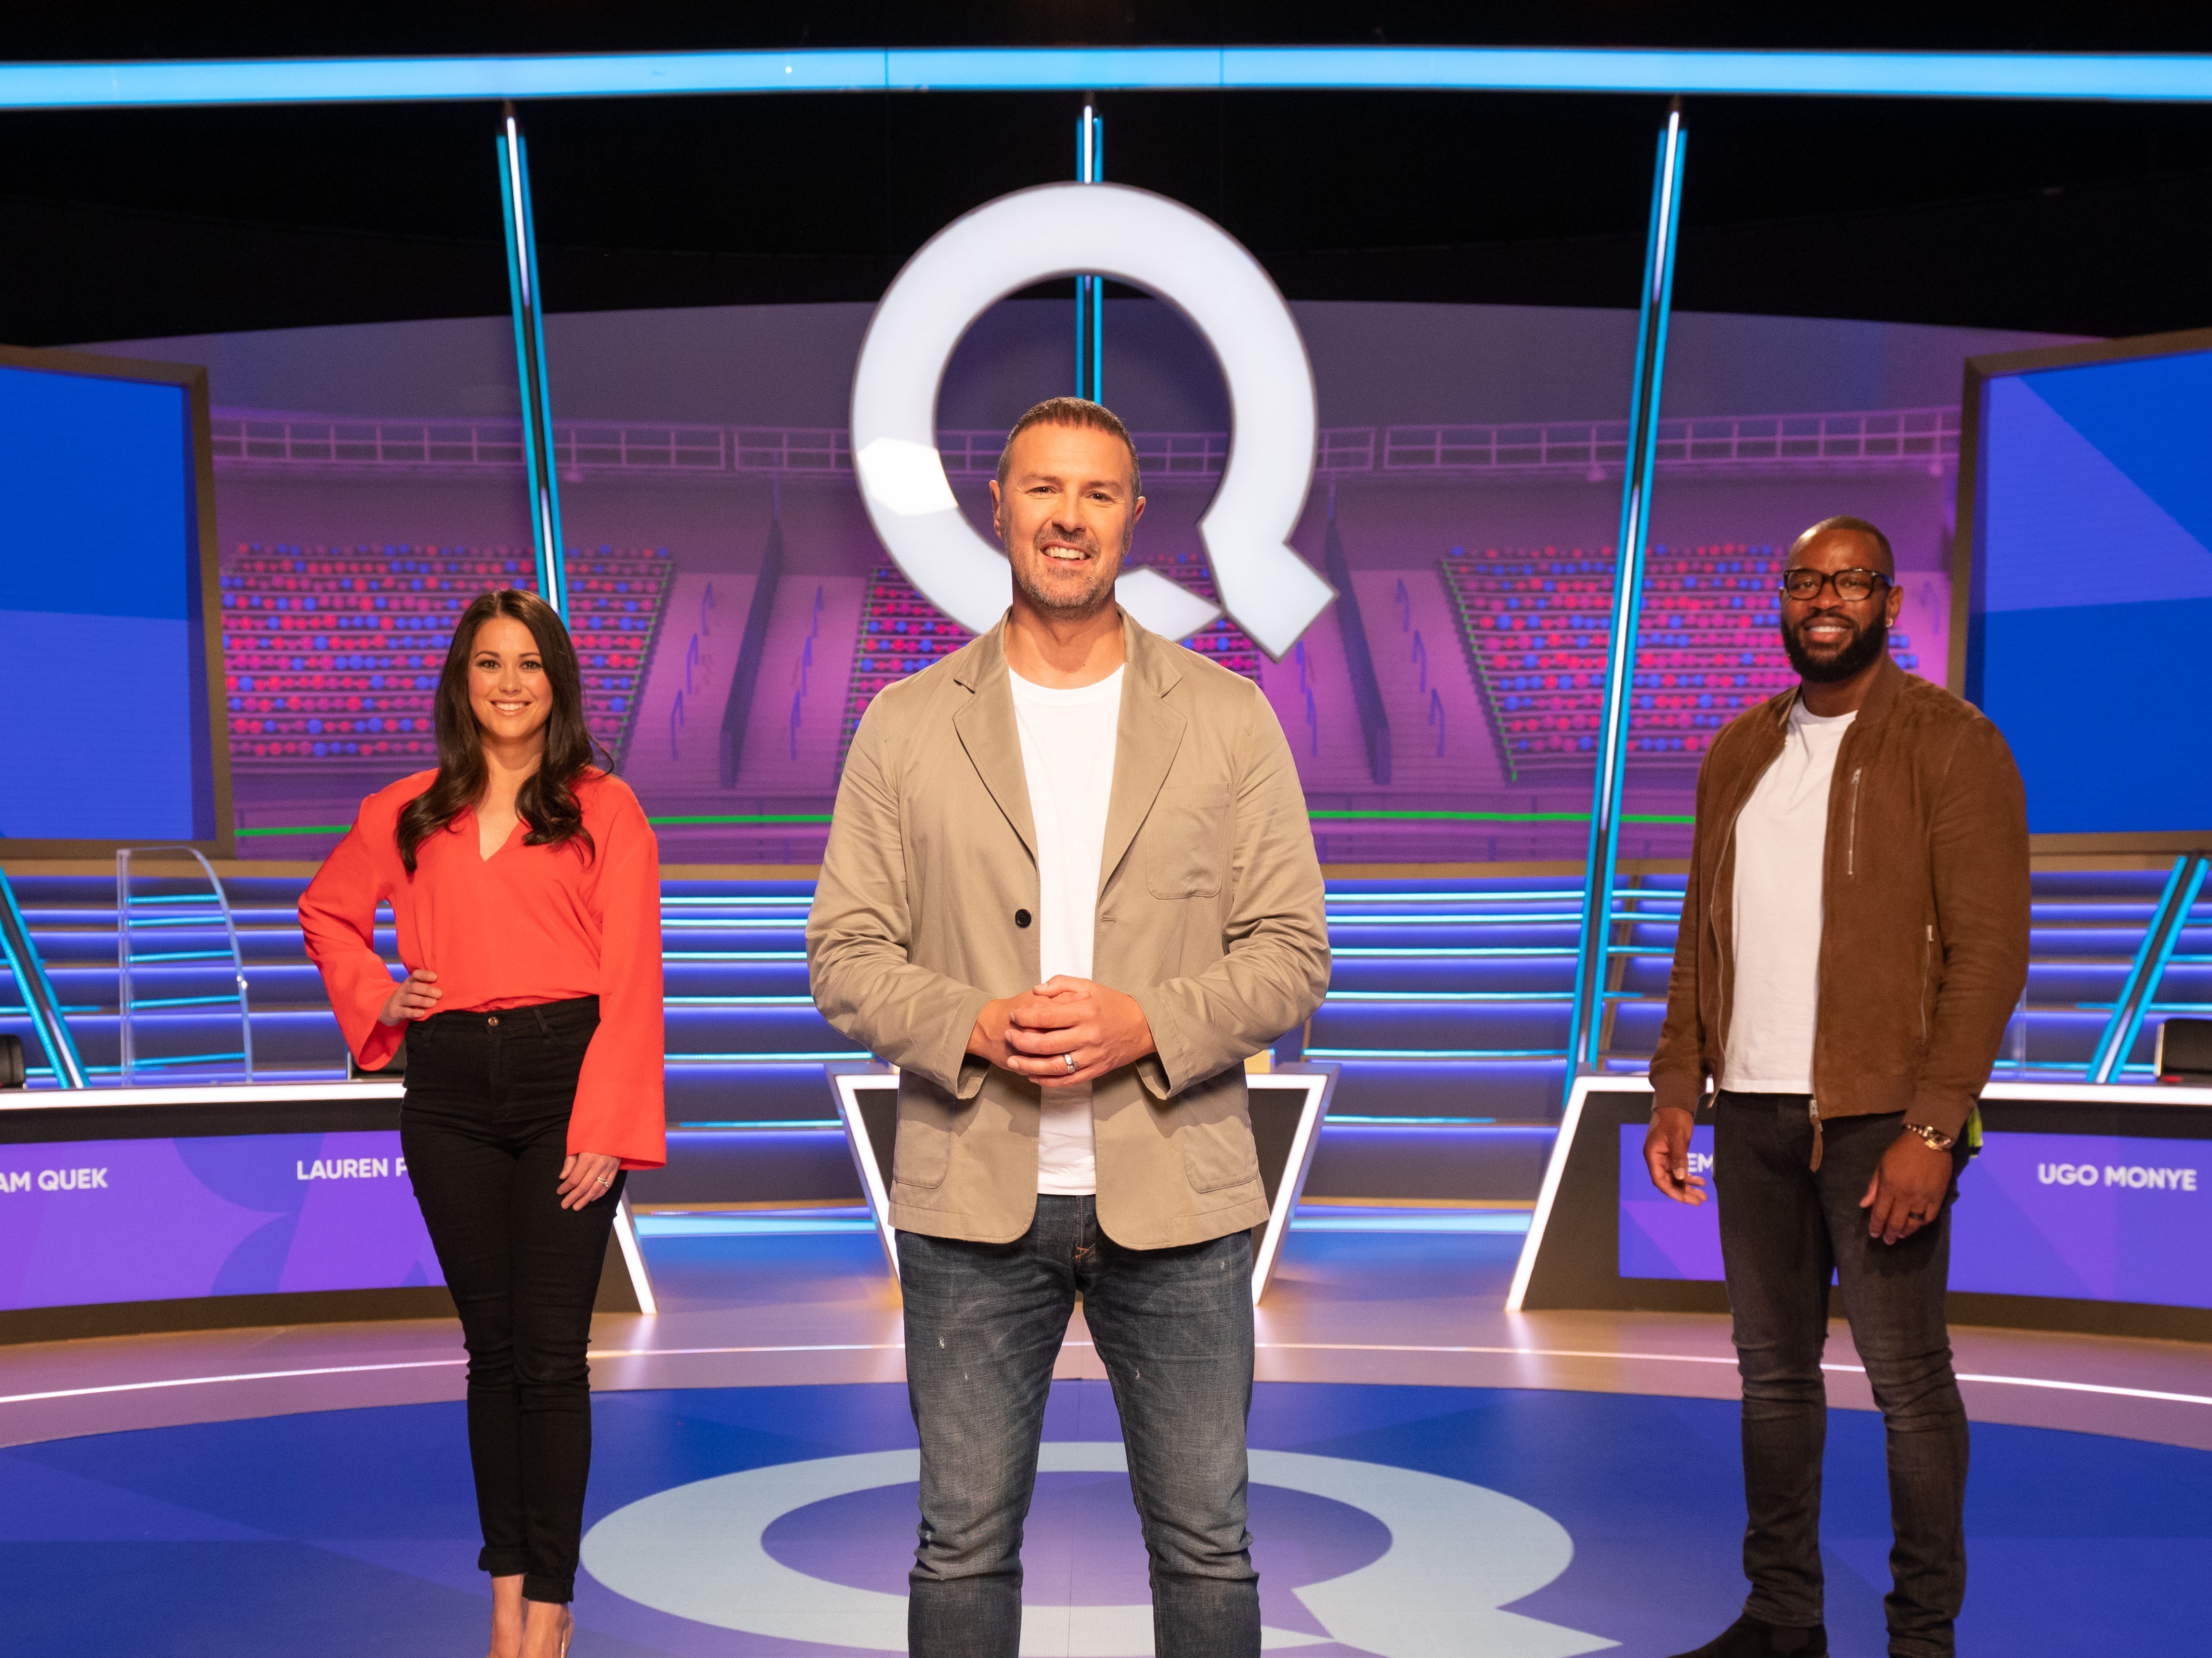 Sam Quek, Paddy McGuinness and Ugo Monye currently front the BBC’s long-running quiz series